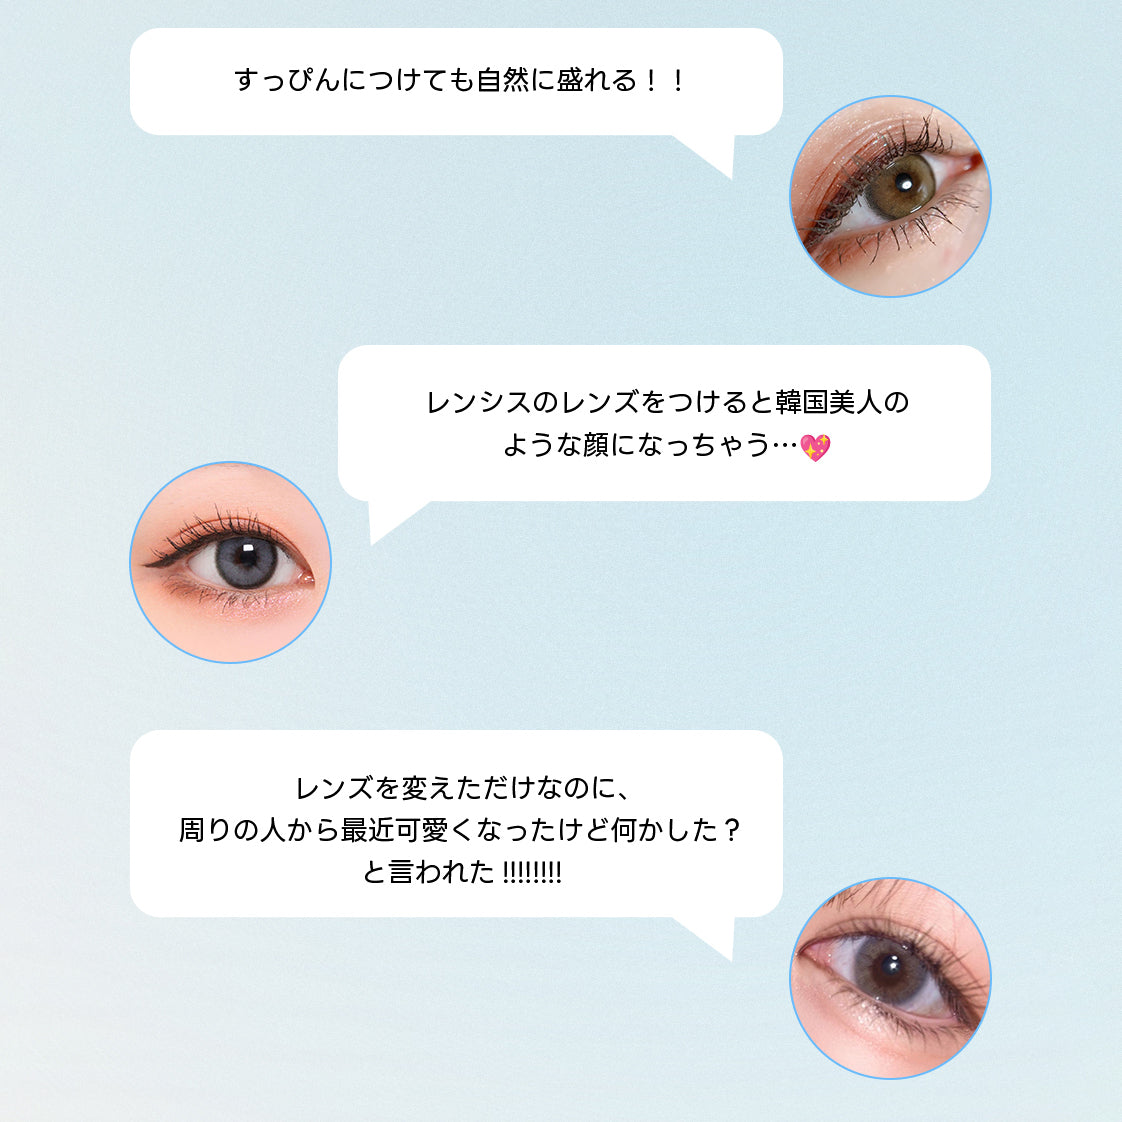 Lenssis 1day DAISY ROSY BEIGE【1箱10枚入り】